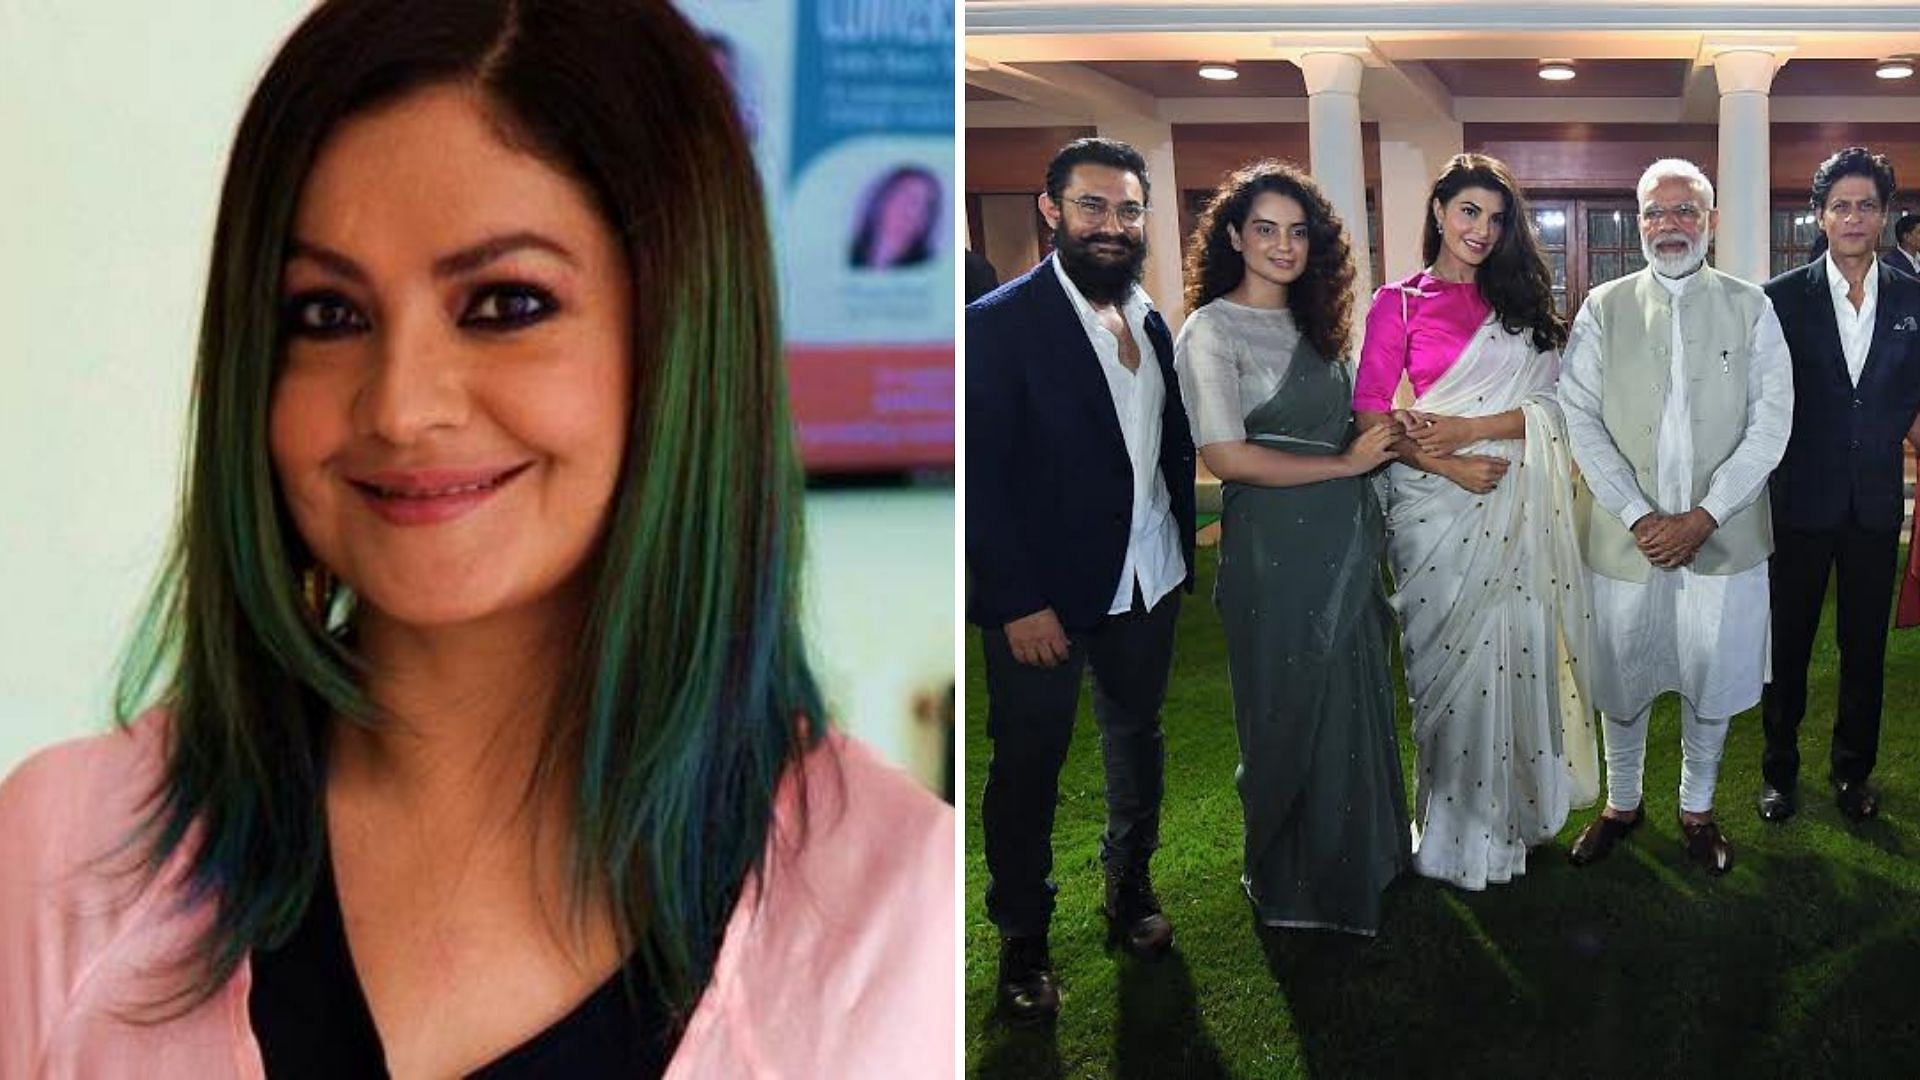 Pooja Bhatt has taken a sharp jibe at the interaction between Bollywood celebrities and PM Modi.